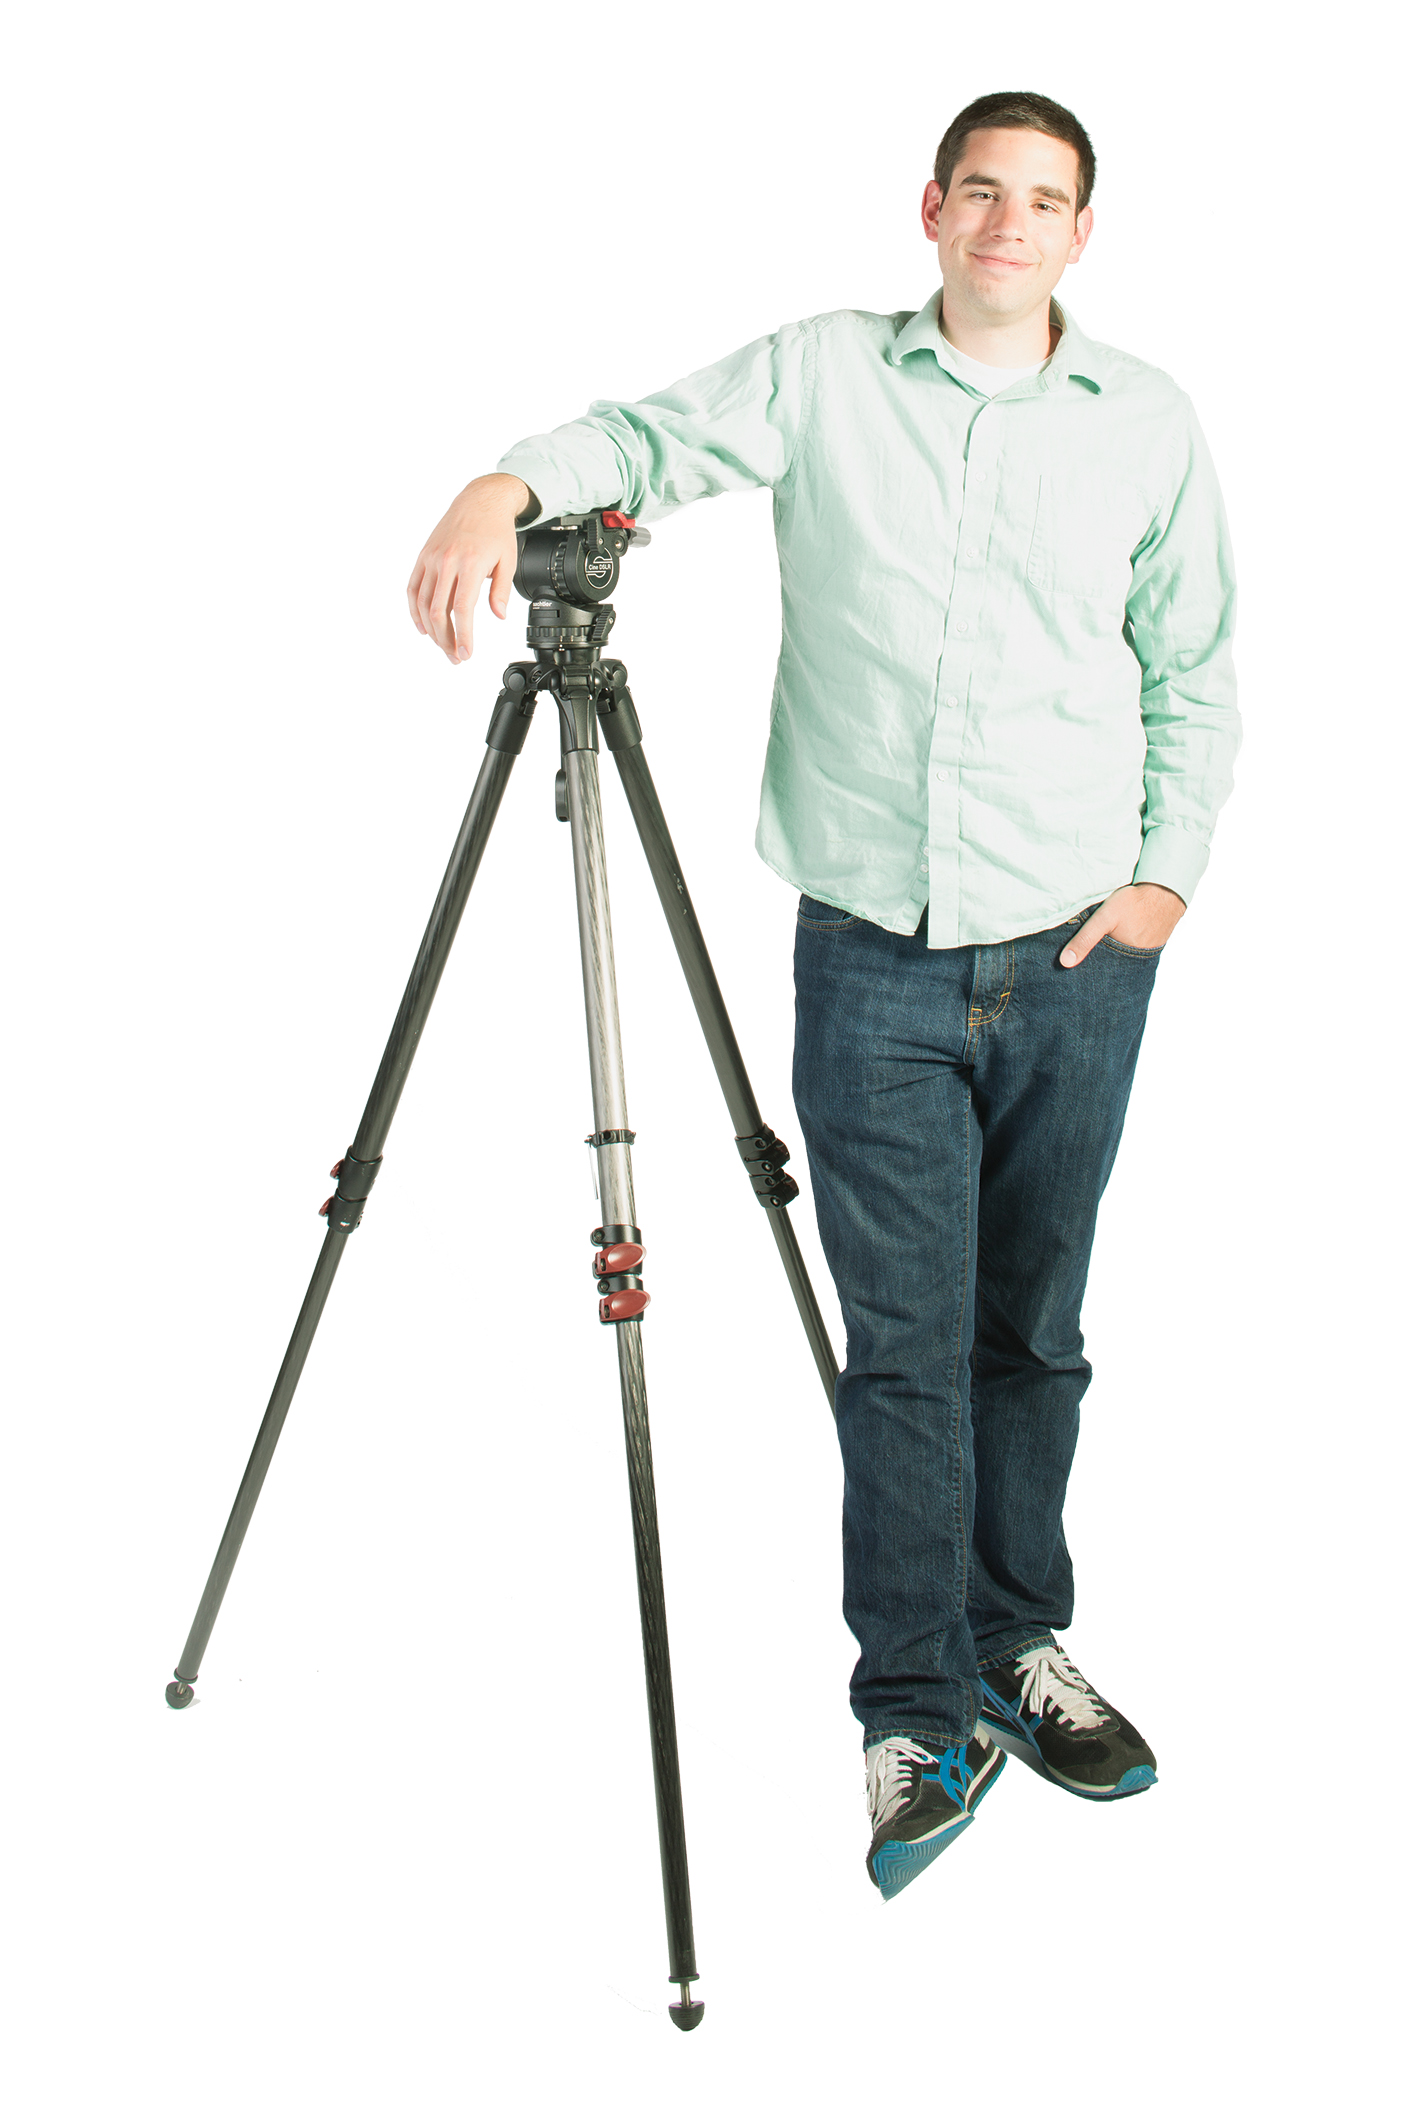 Jefrey Merrill stands next to a video camera